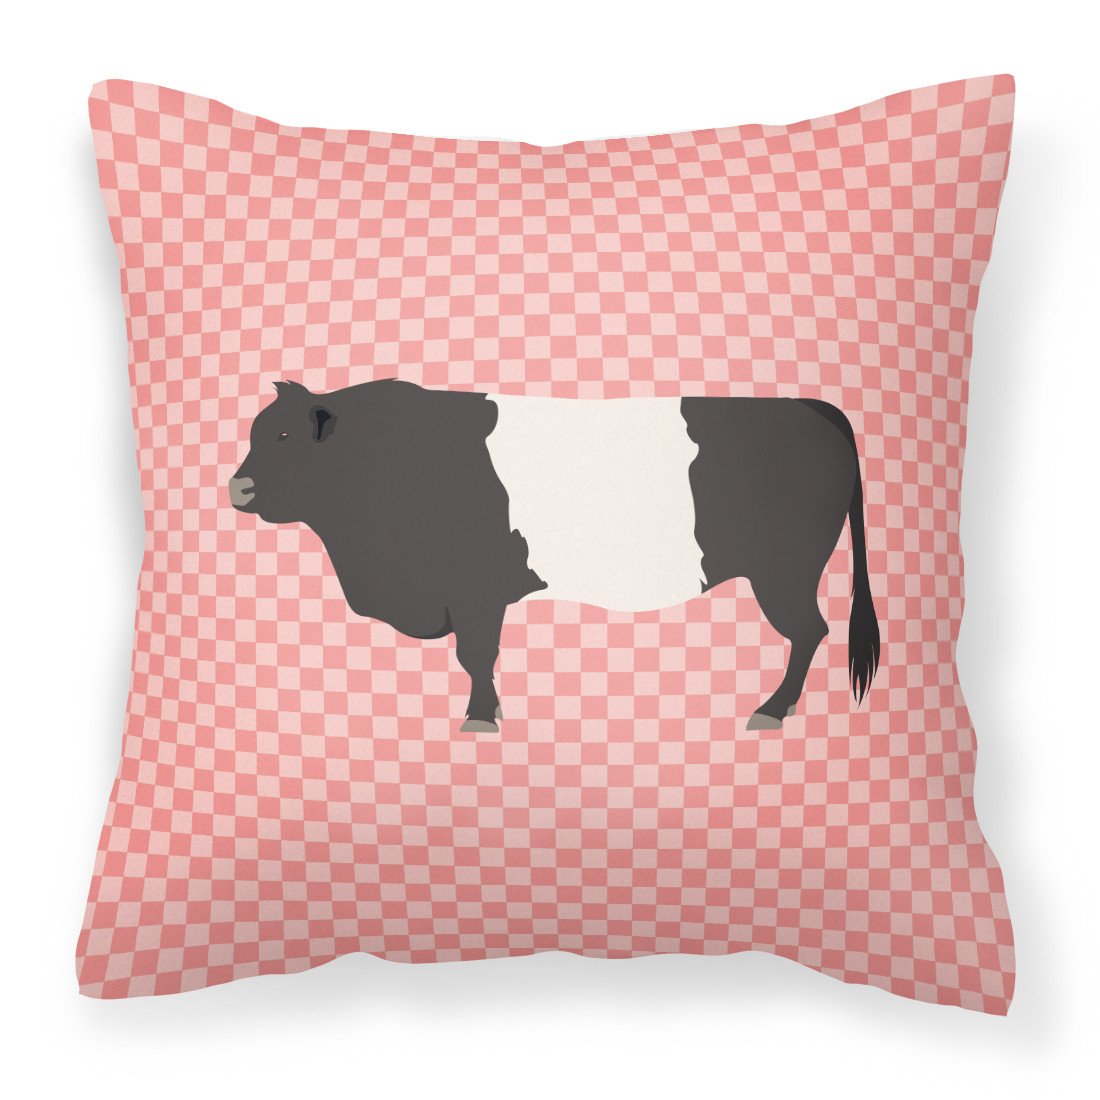 Belted Galloway Cow Pink Check Fabric Decorative Pillow BB7831PW1818 by Caroline's Treasures